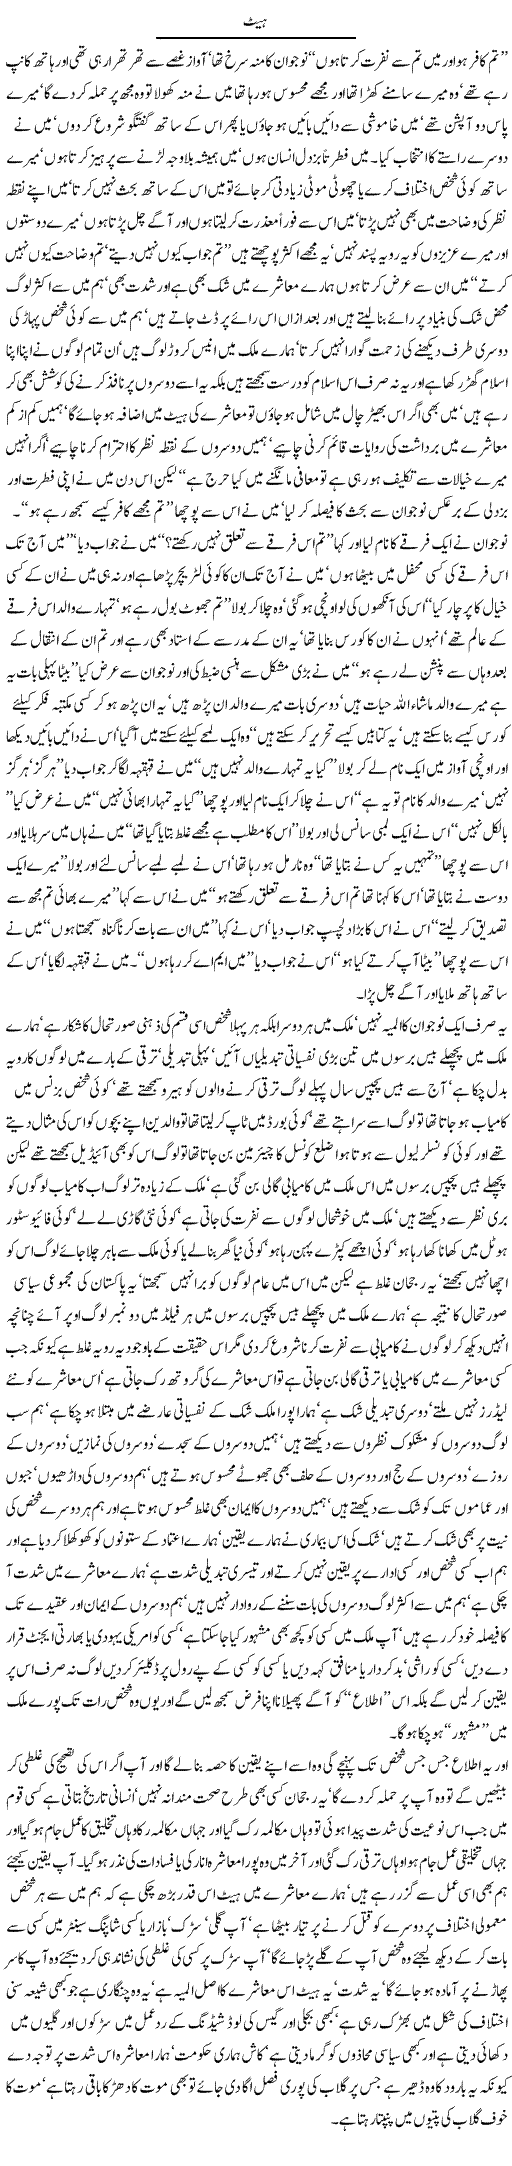 Islam and Pakistanis Express Column Javed Chaudhry 14 January 2012